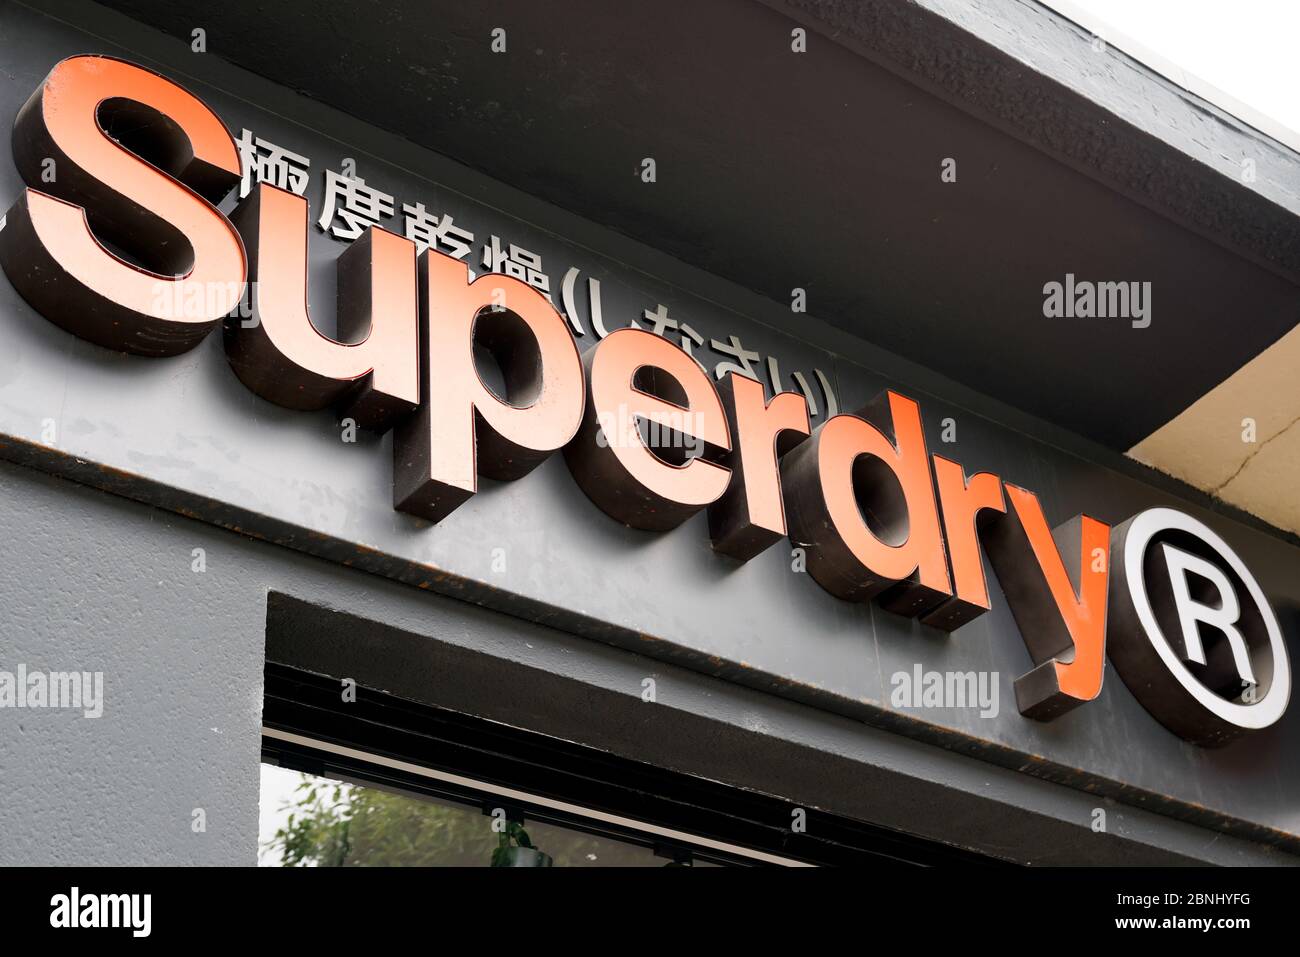 Superdry Logo High Resolution Stock Photography and Images - Alamy